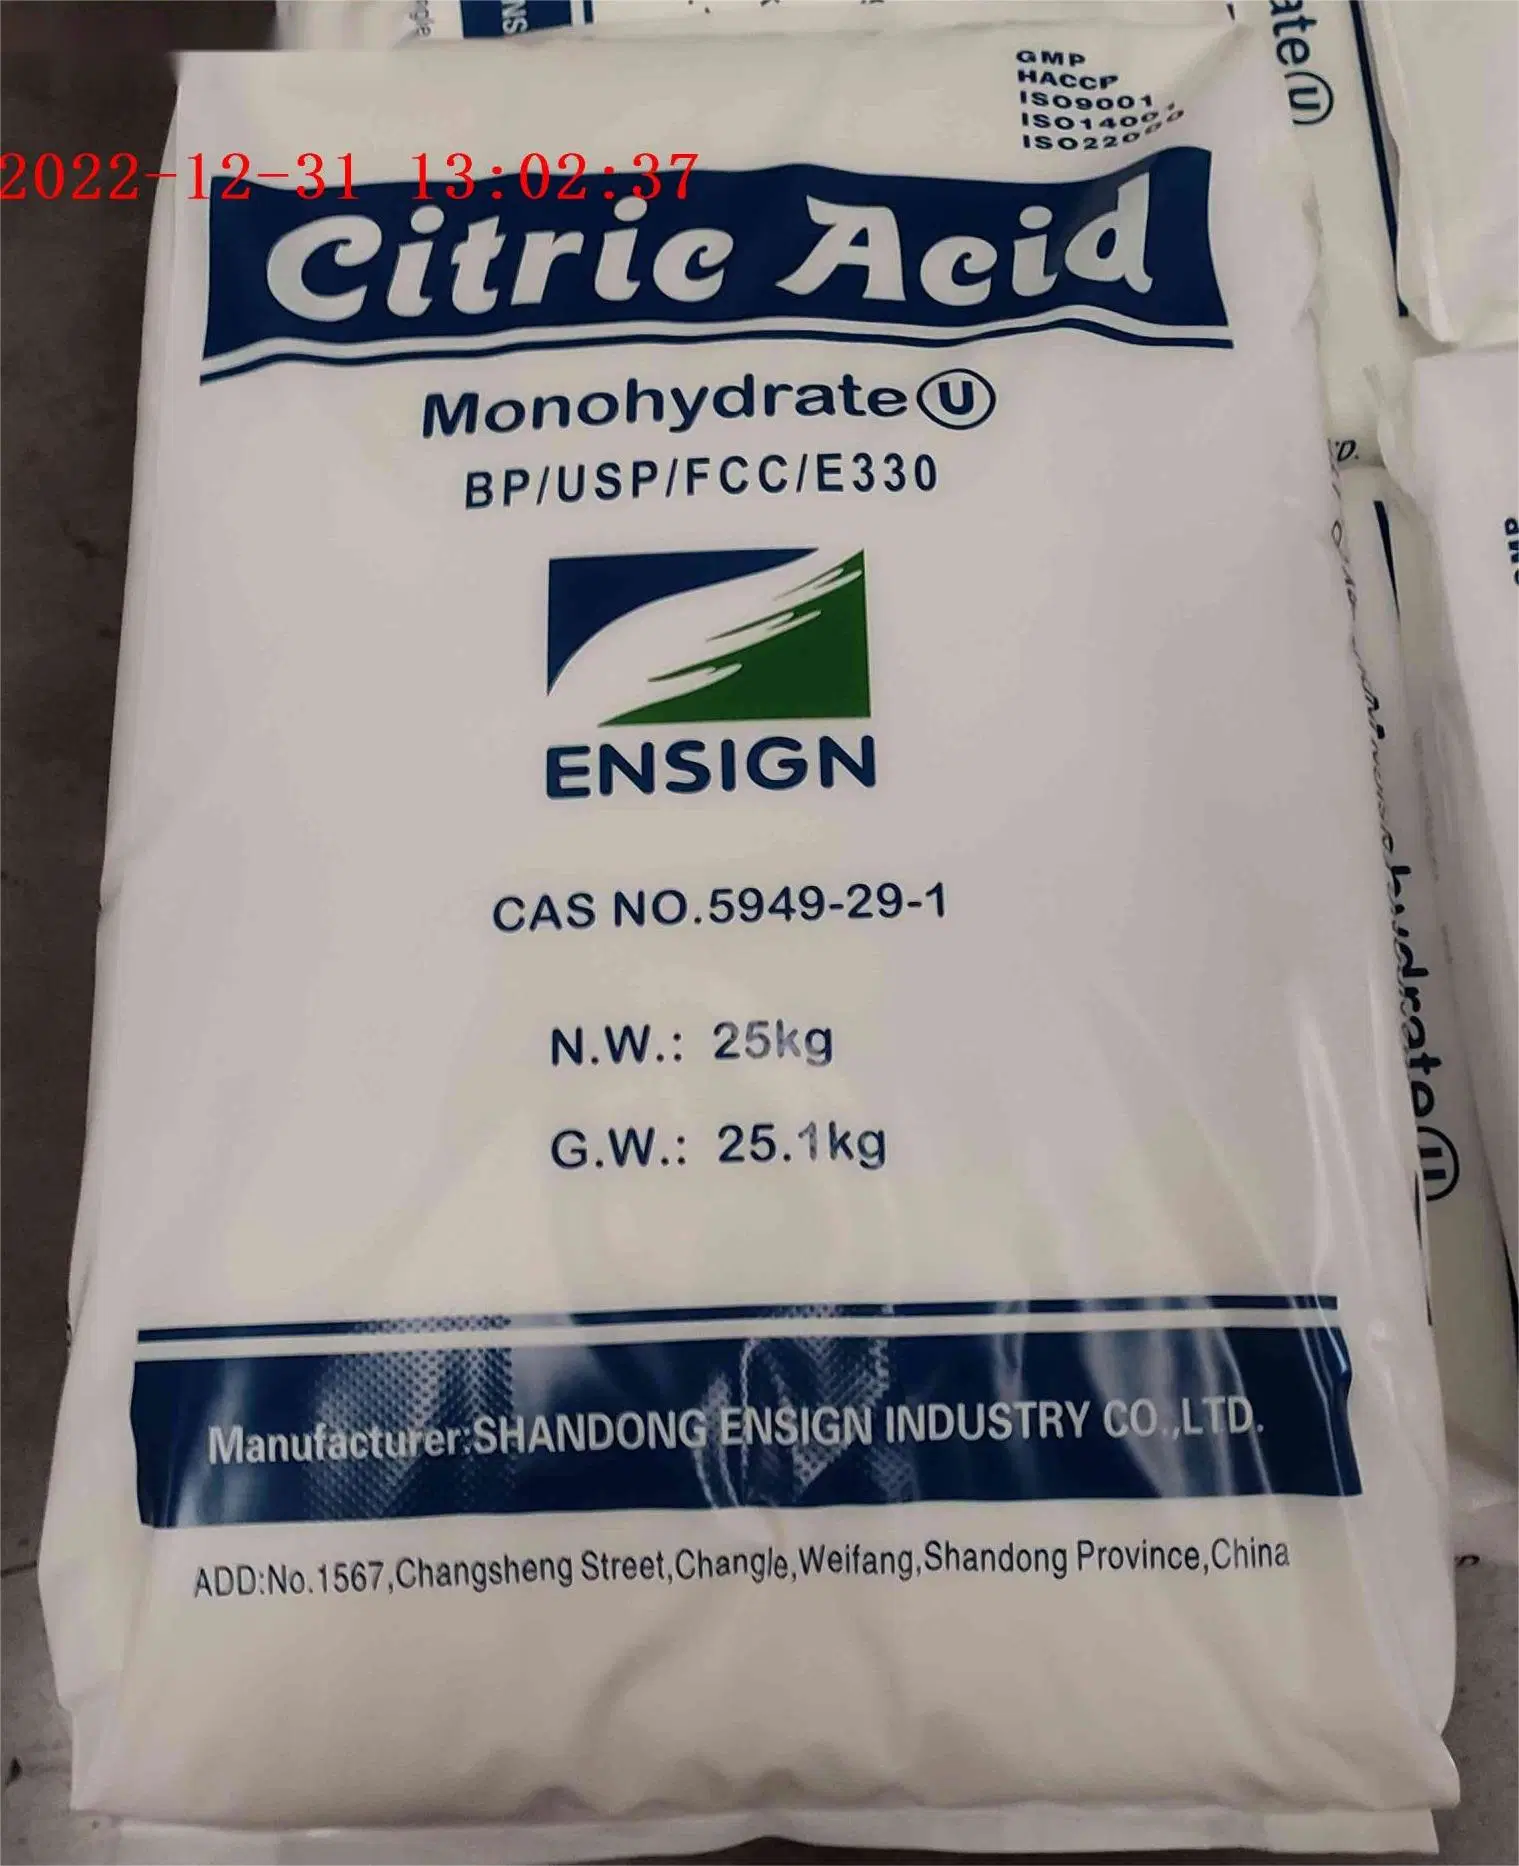 China Factory Supply Citric Acid Monohydrate Brand Ensign CAS No.: 5949-29-1